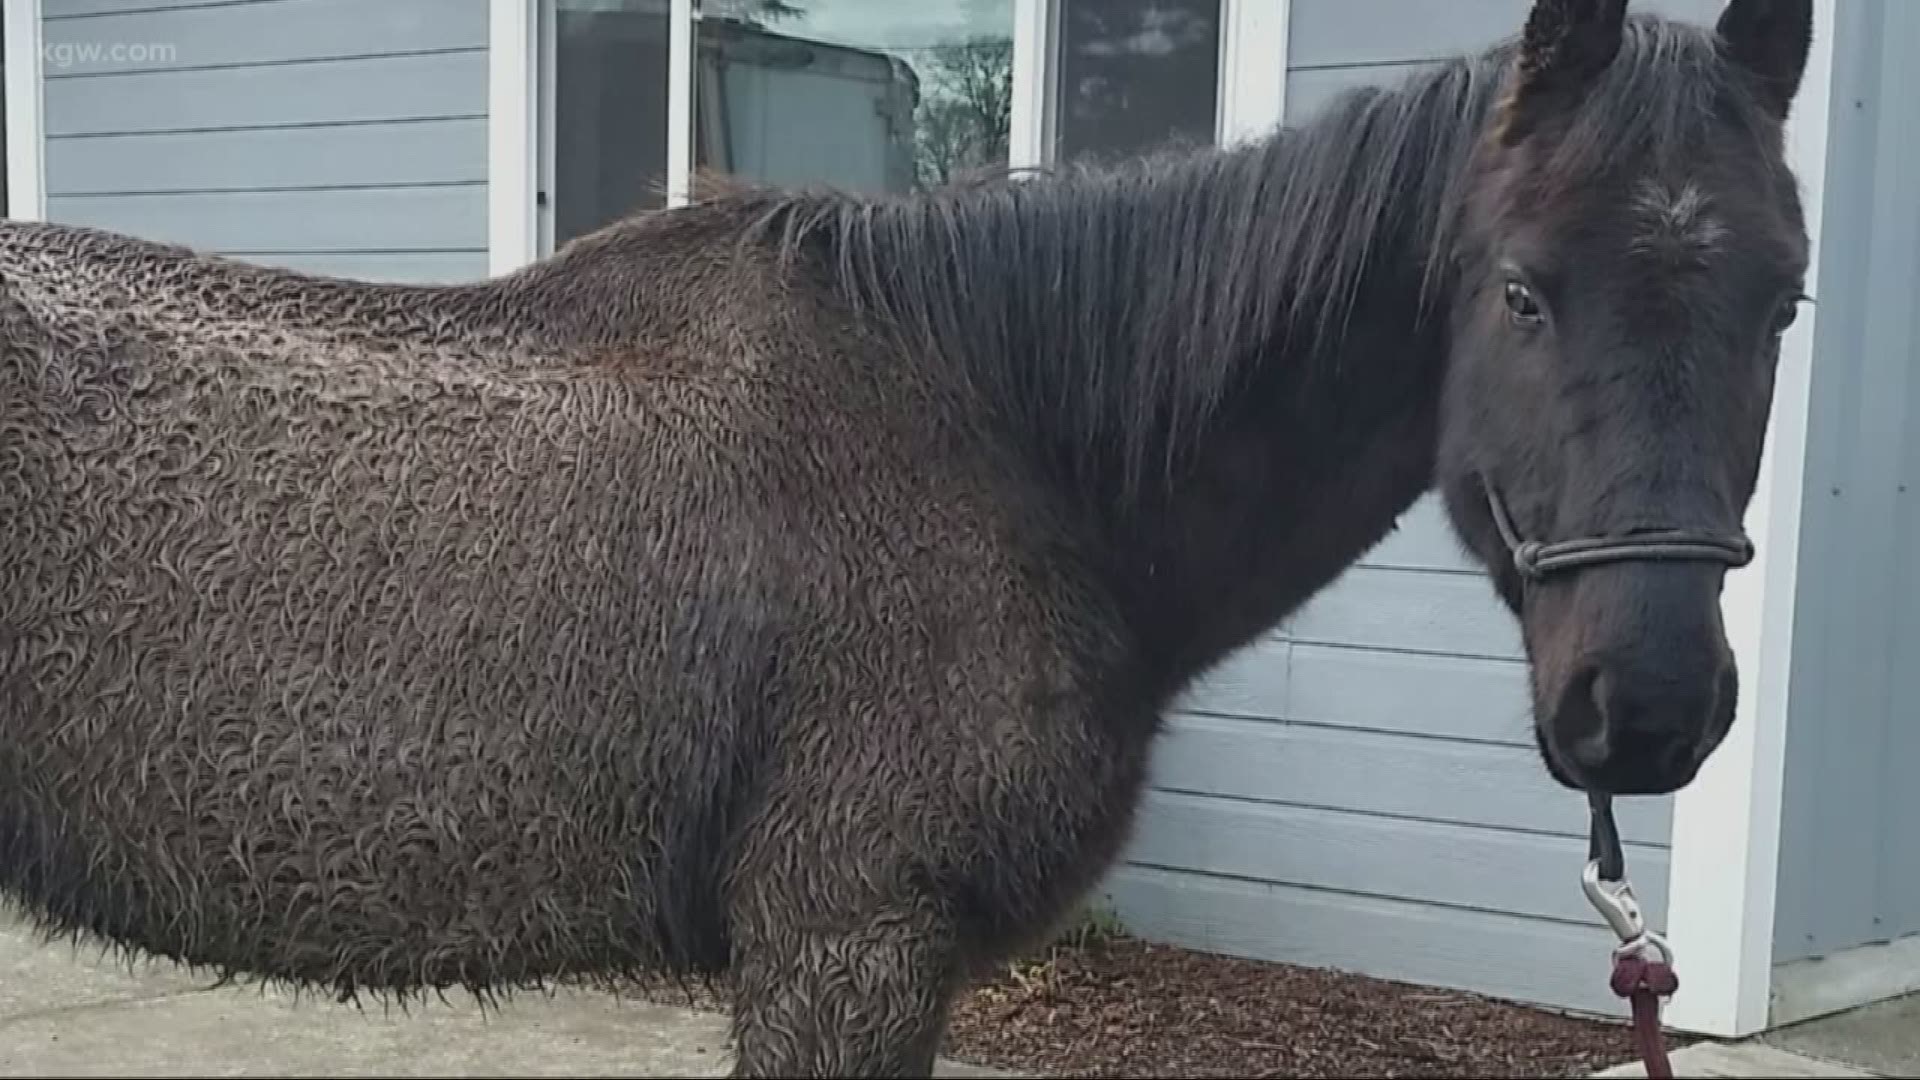 Can 'Justice' the horse gain court standing and sue for neglect?